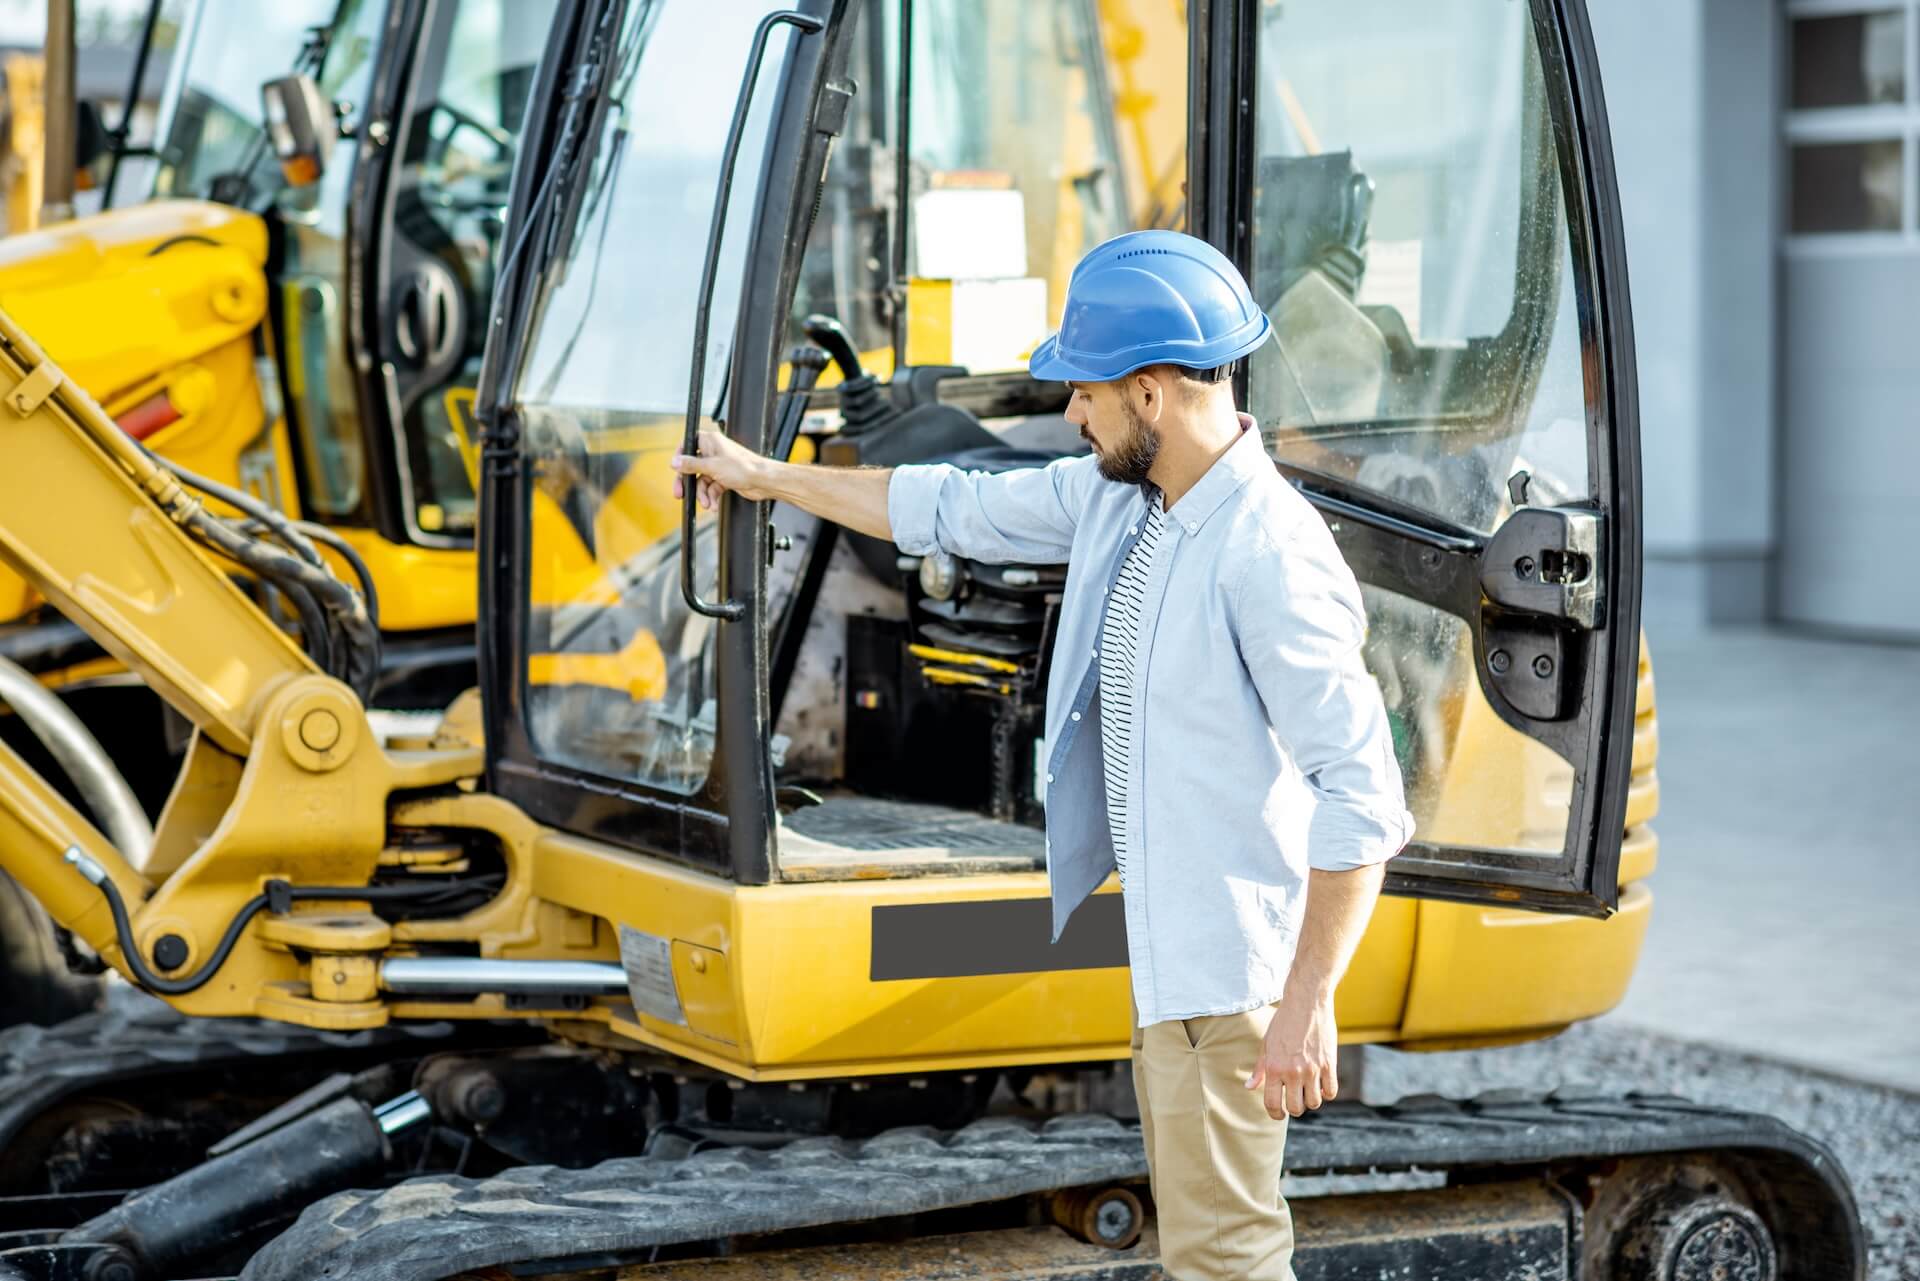 Contractor in the process of buying construction equipment | Featured image for Buying Construction Equipment - Tips & Considerations blog by Machinery Direct.